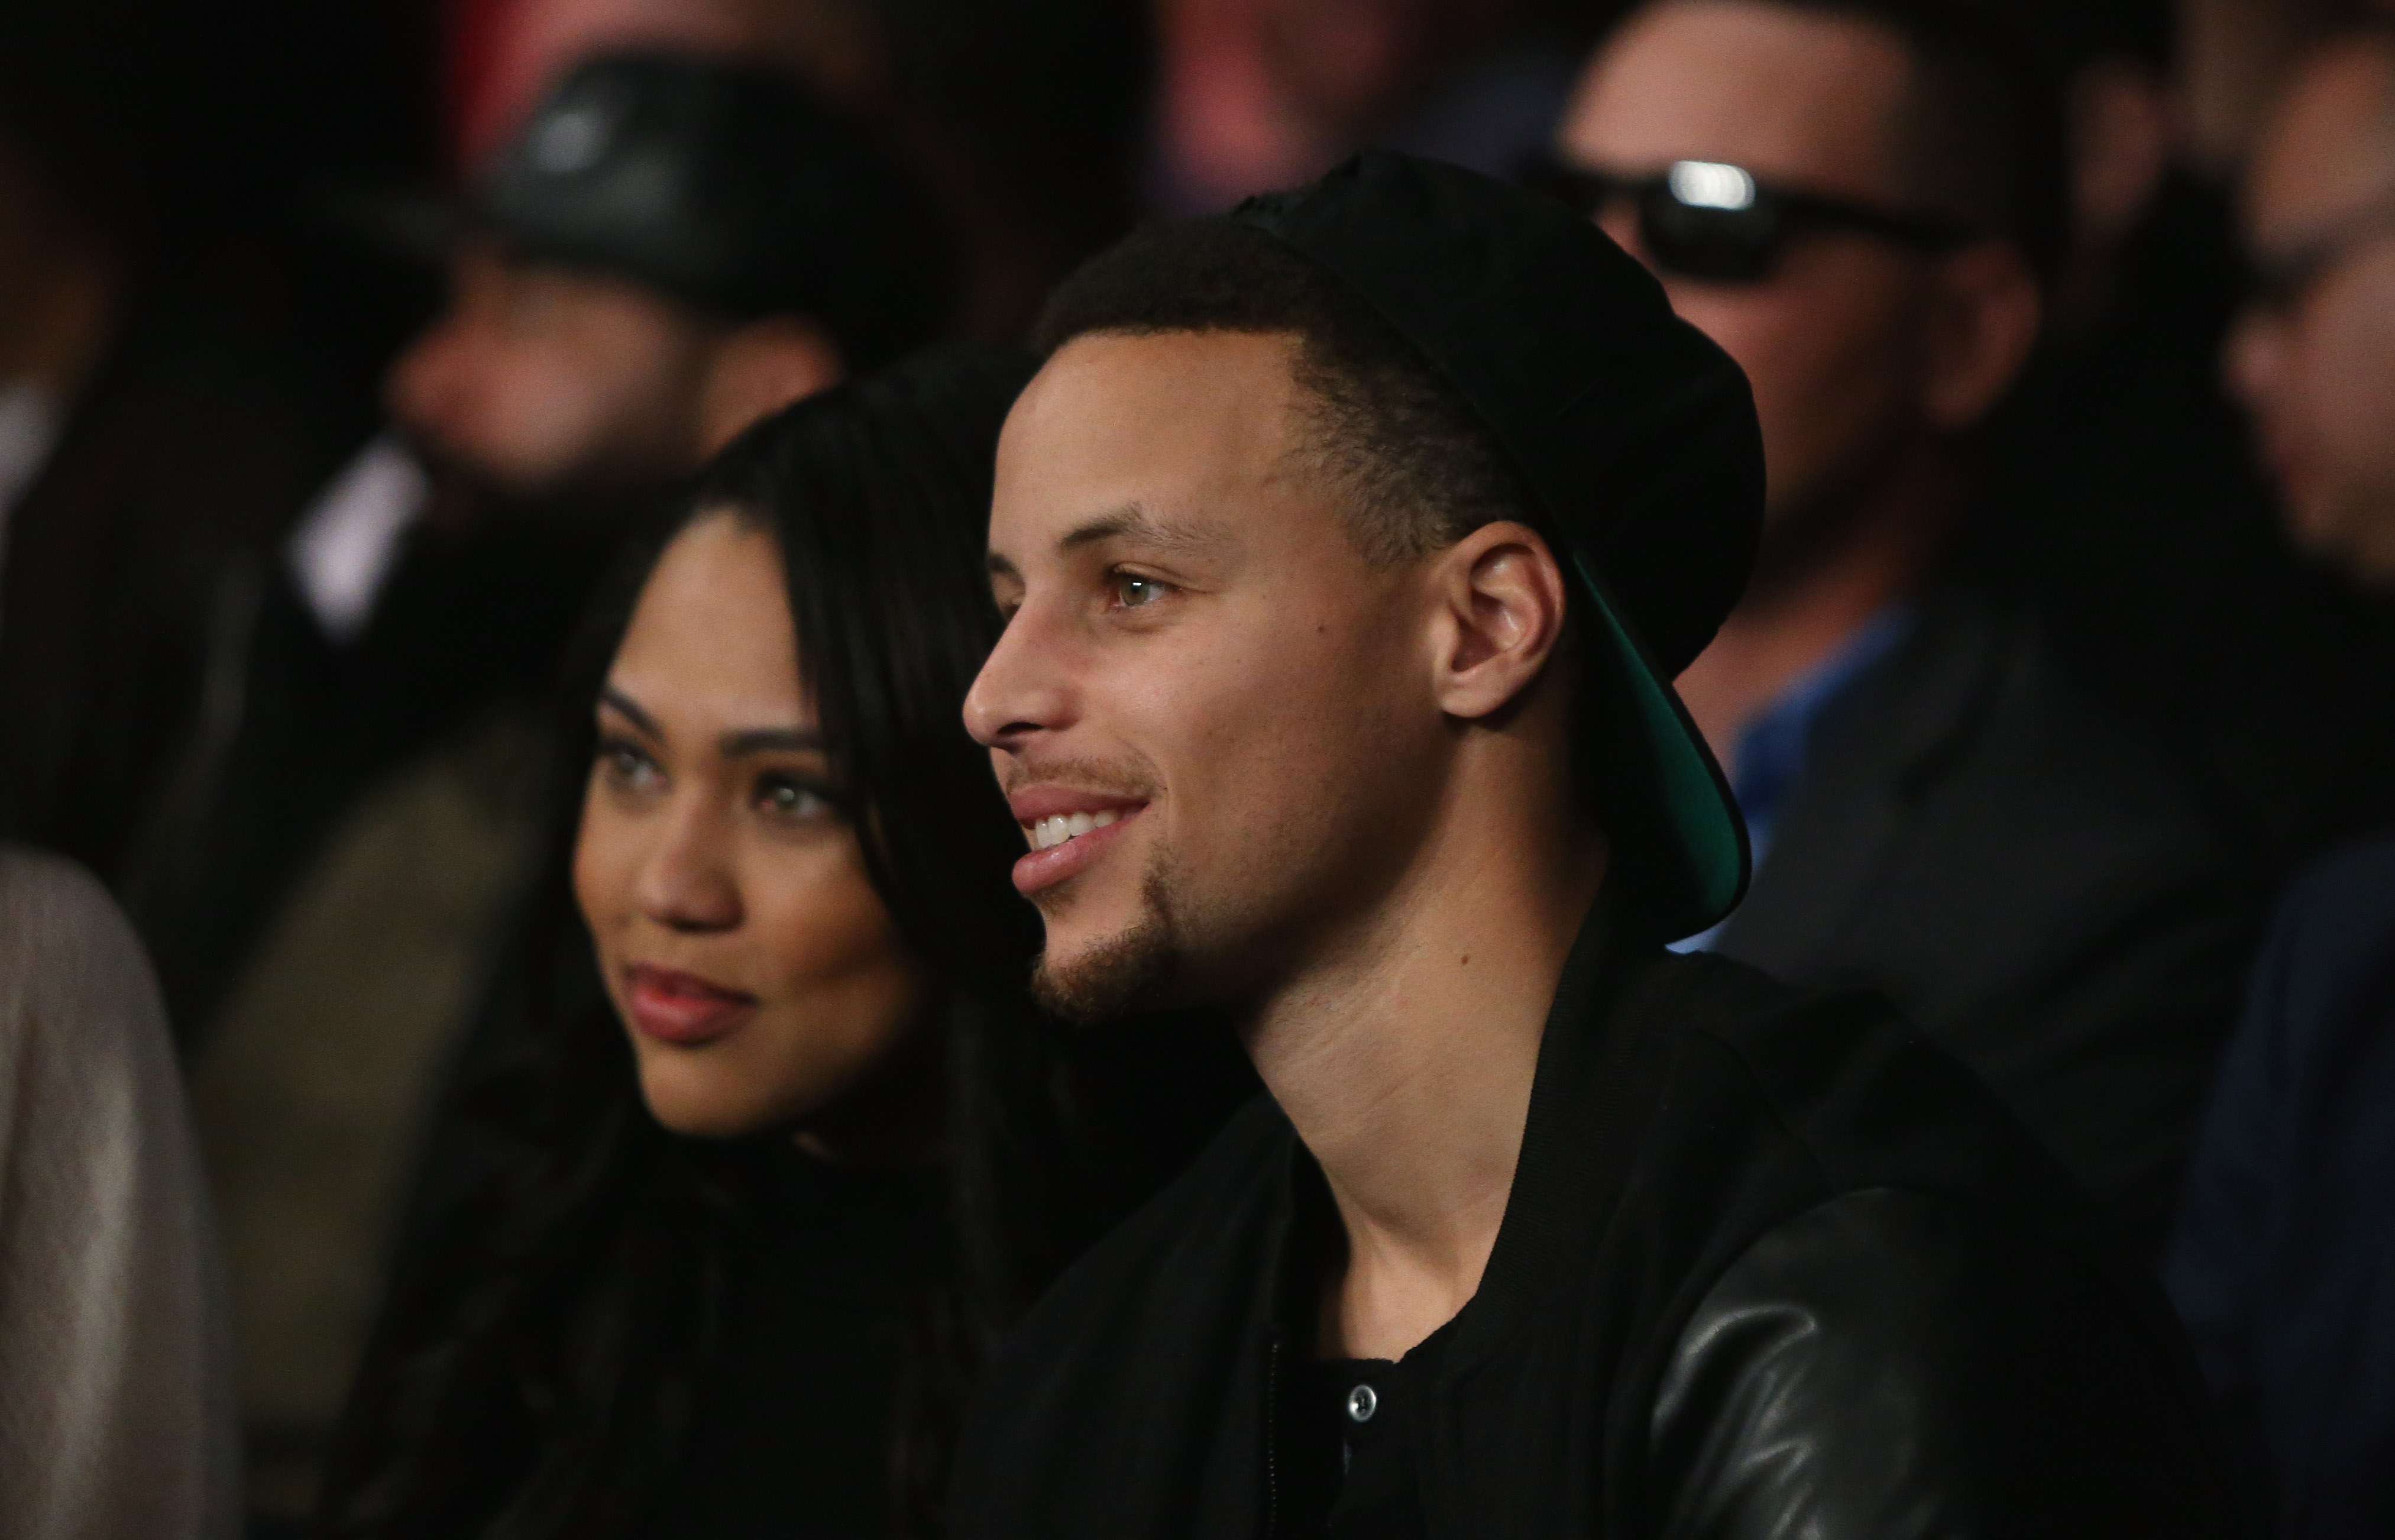 OAKLAND, CA - MARCH 26: Stephen Curry #30 of the Golden State Warriors and his wife Ayesha attend the Andre Ward fight against Sullivan Barrera in their IBF Light Heavyweight bout at ORACLE Arena on March 26, 2016 in Oakland, California.   Ezra Shaw/Getty Images/AFP